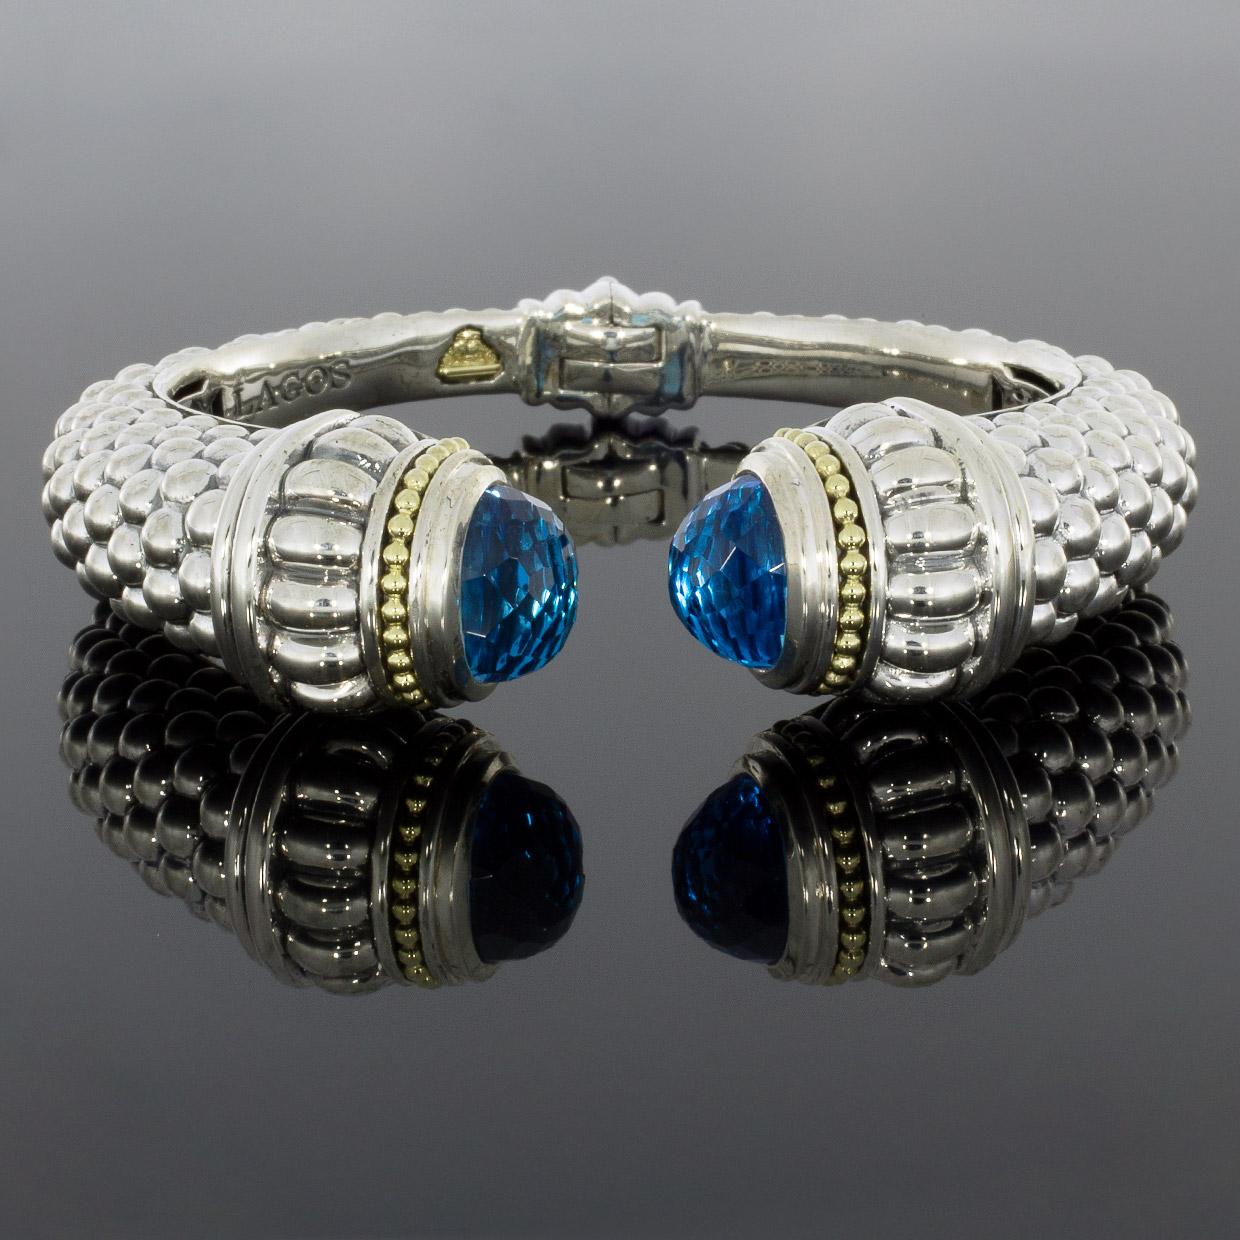 Item Details

Main Stone Treatment Not Enhanced
Main Stone Shape RC
Main Stone Creation Natural
Main Stone Topaz
Main Stone Color Blue
Estimated Retail $2,150.00
Brand Lagos
Collection Caviar
Metal Mixed Metals
Style Cuff
Fastening Other
Colored